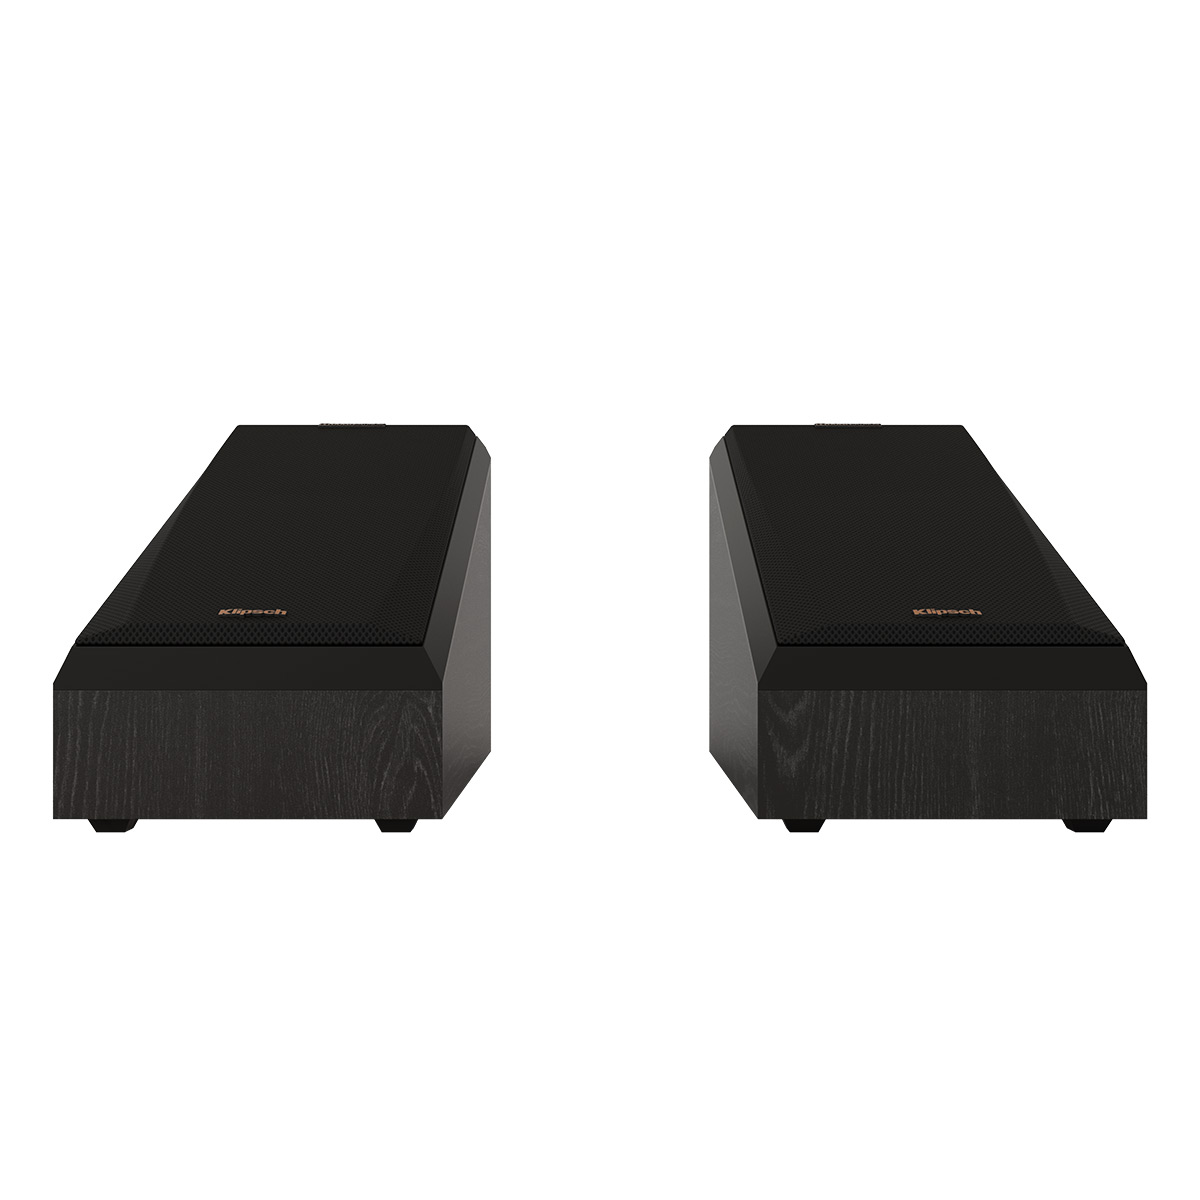 Klipsch RP-500SA II Reference Premiere Dolby Atmos Speaker - Pair (Ebony) - image 4 of 10